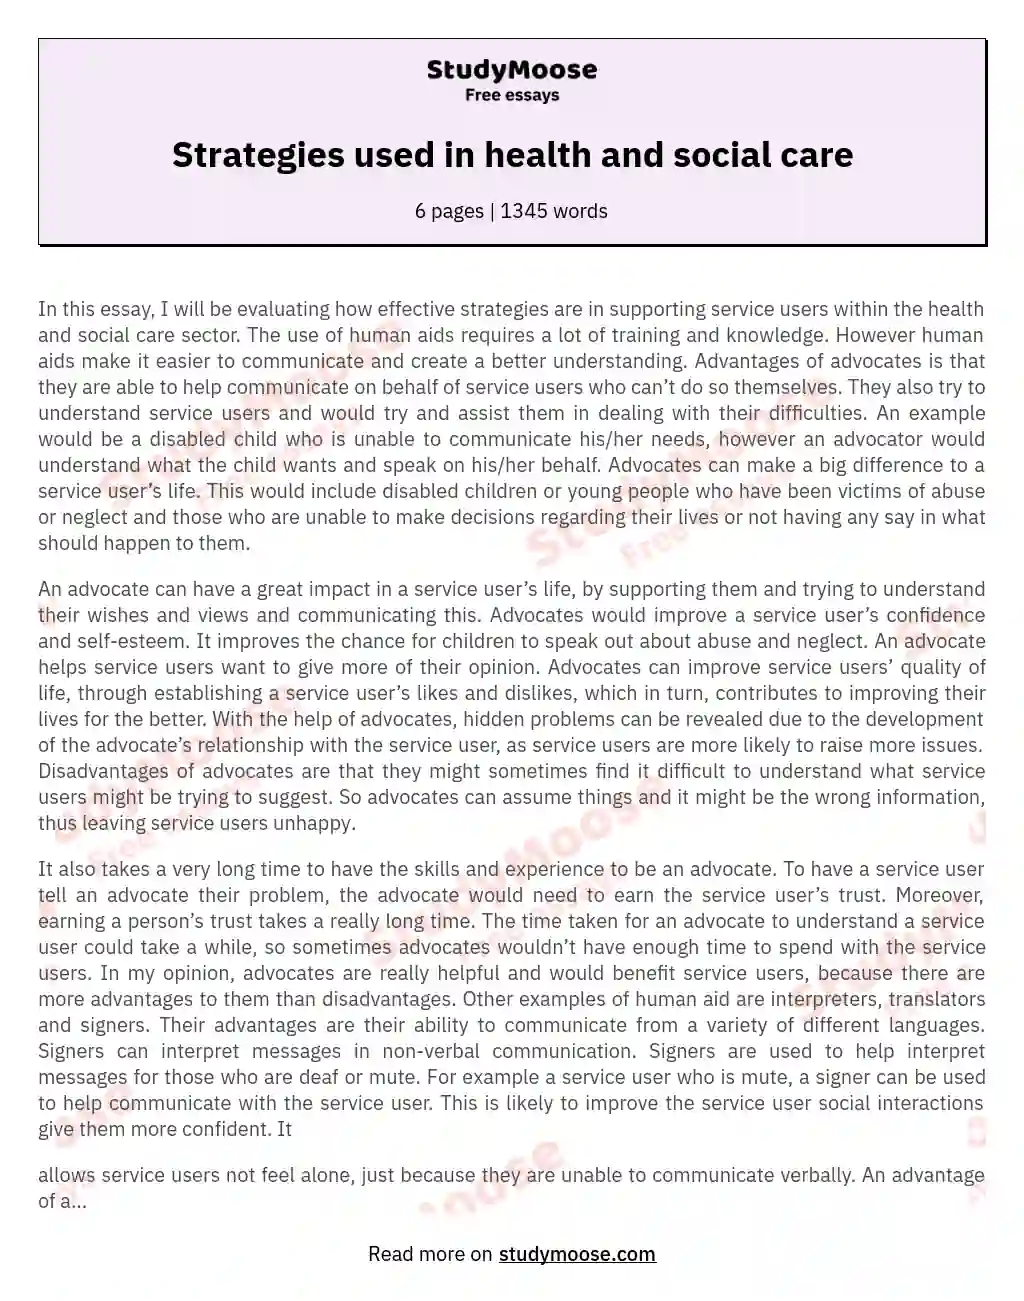 Strategies used in health and social care